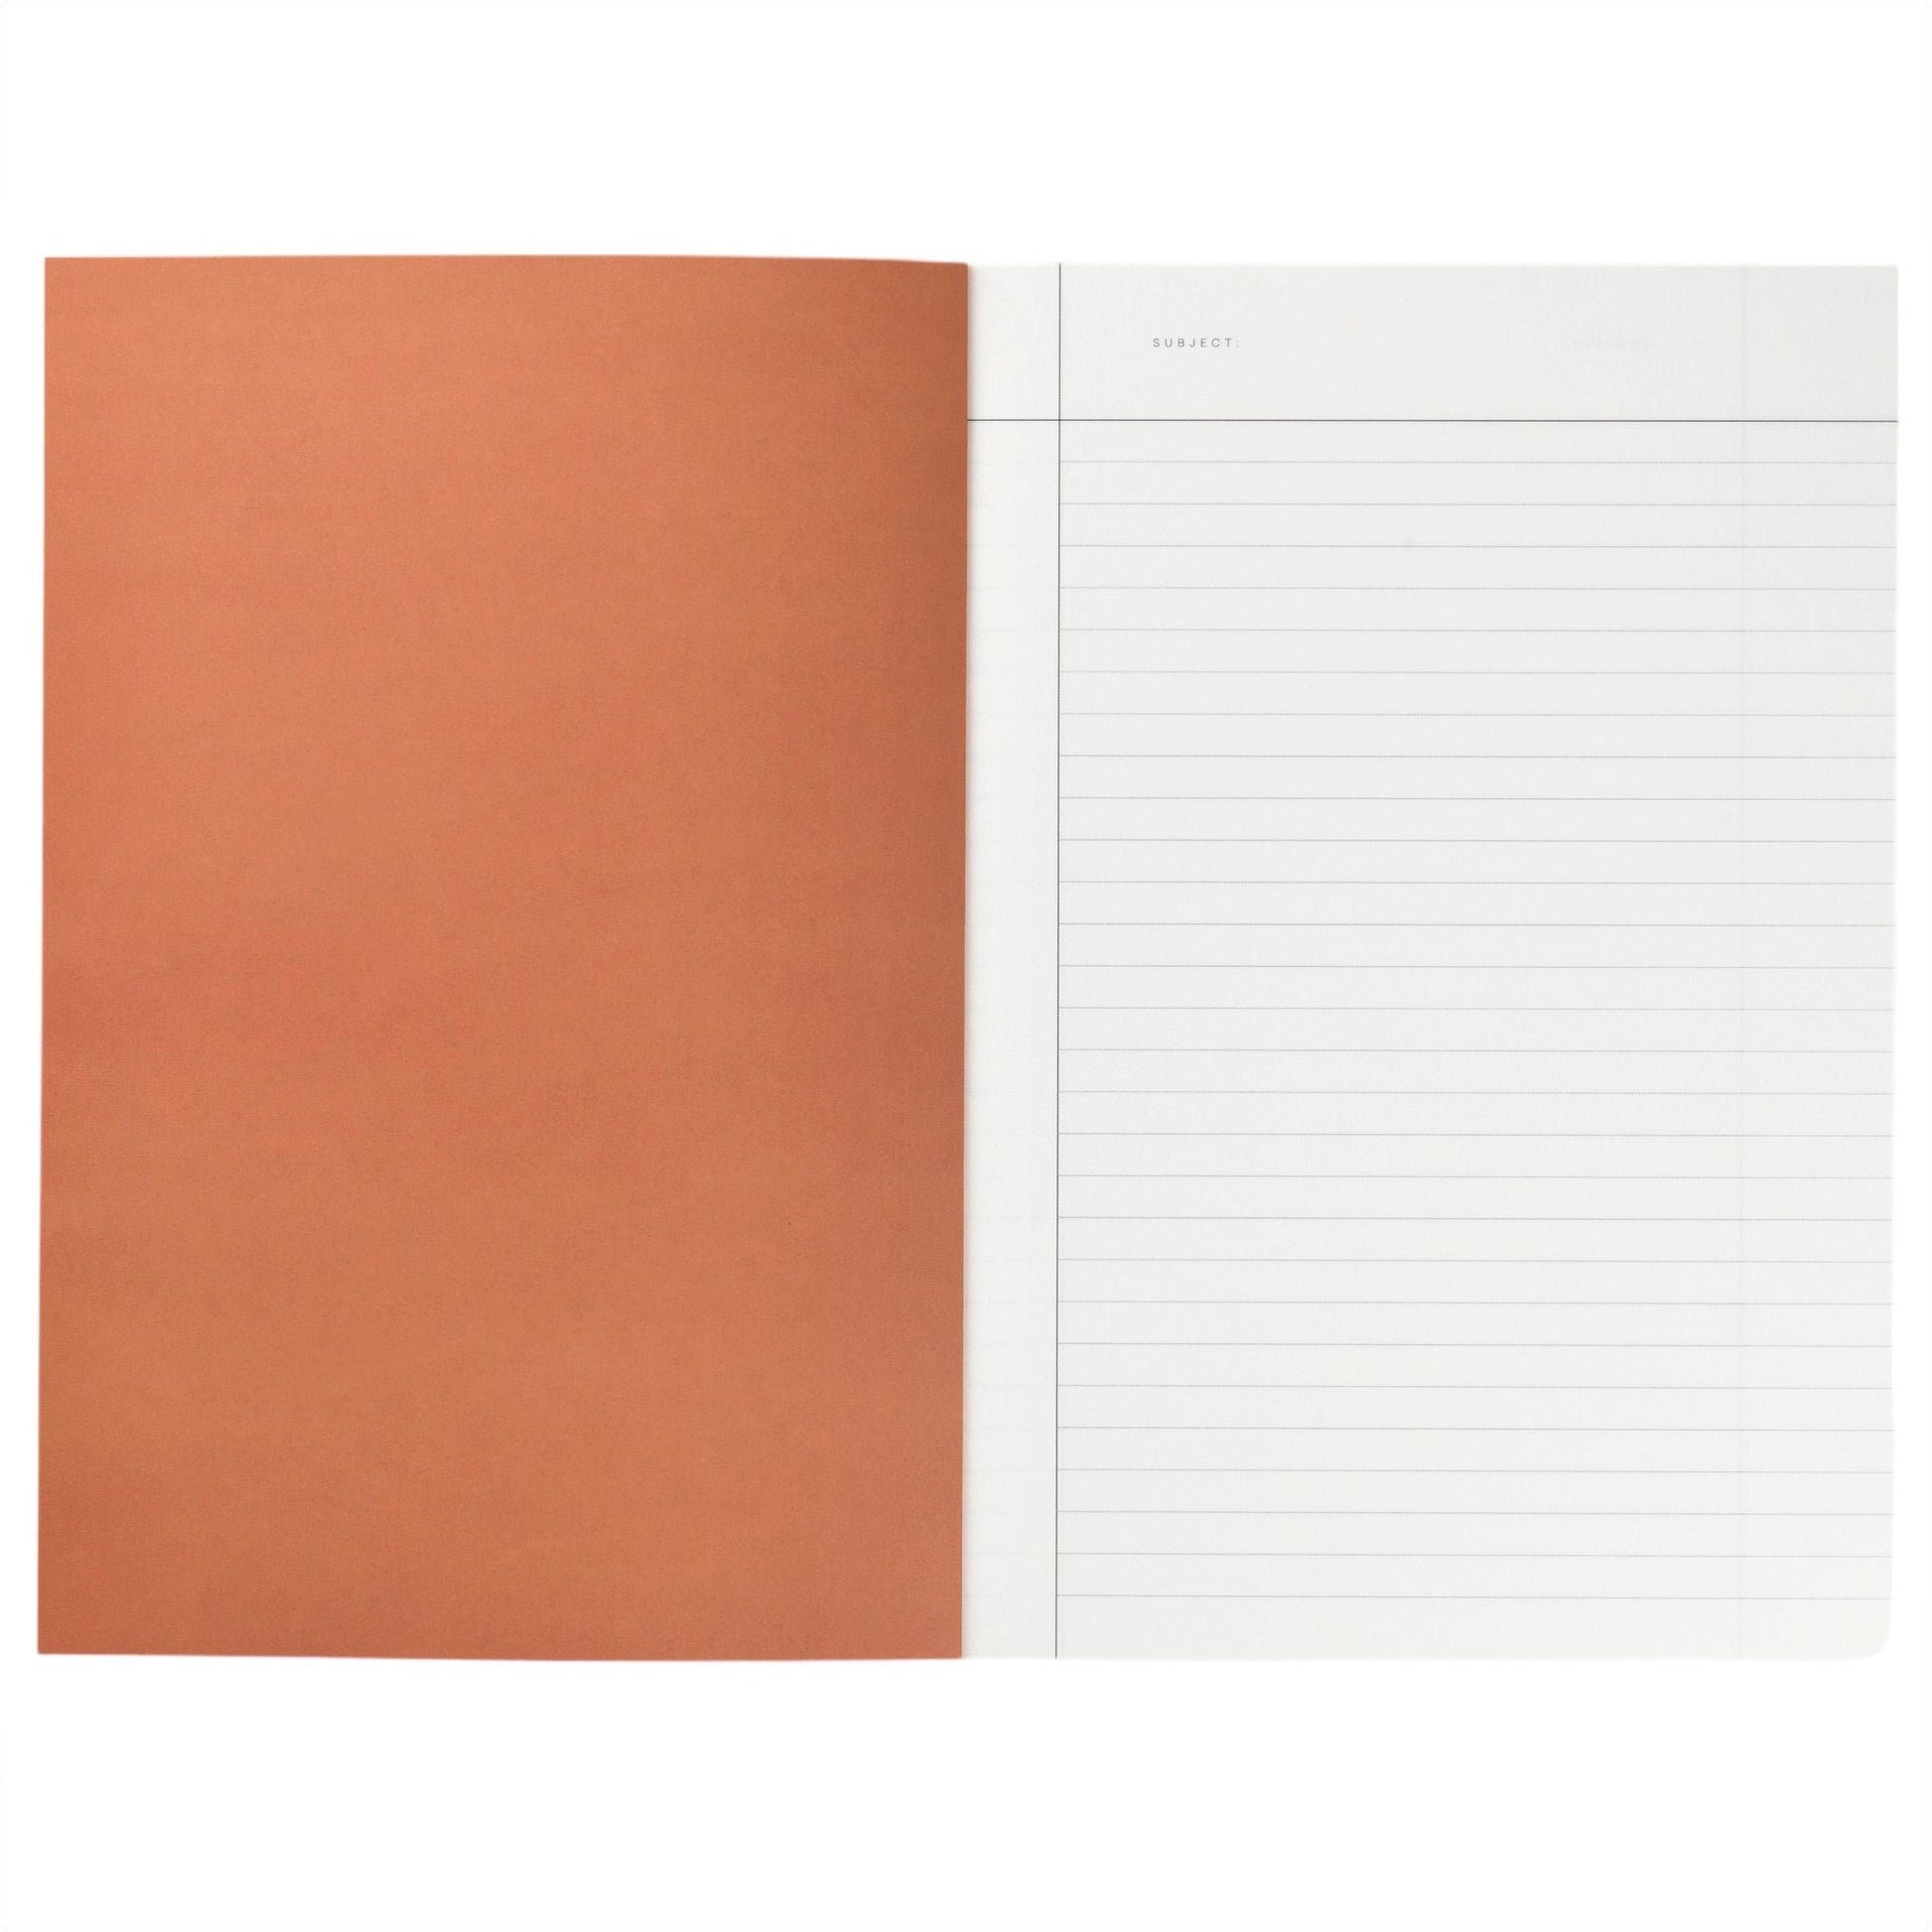 Notebook with a pink grid softcover. Lined inner pages with margin pictured